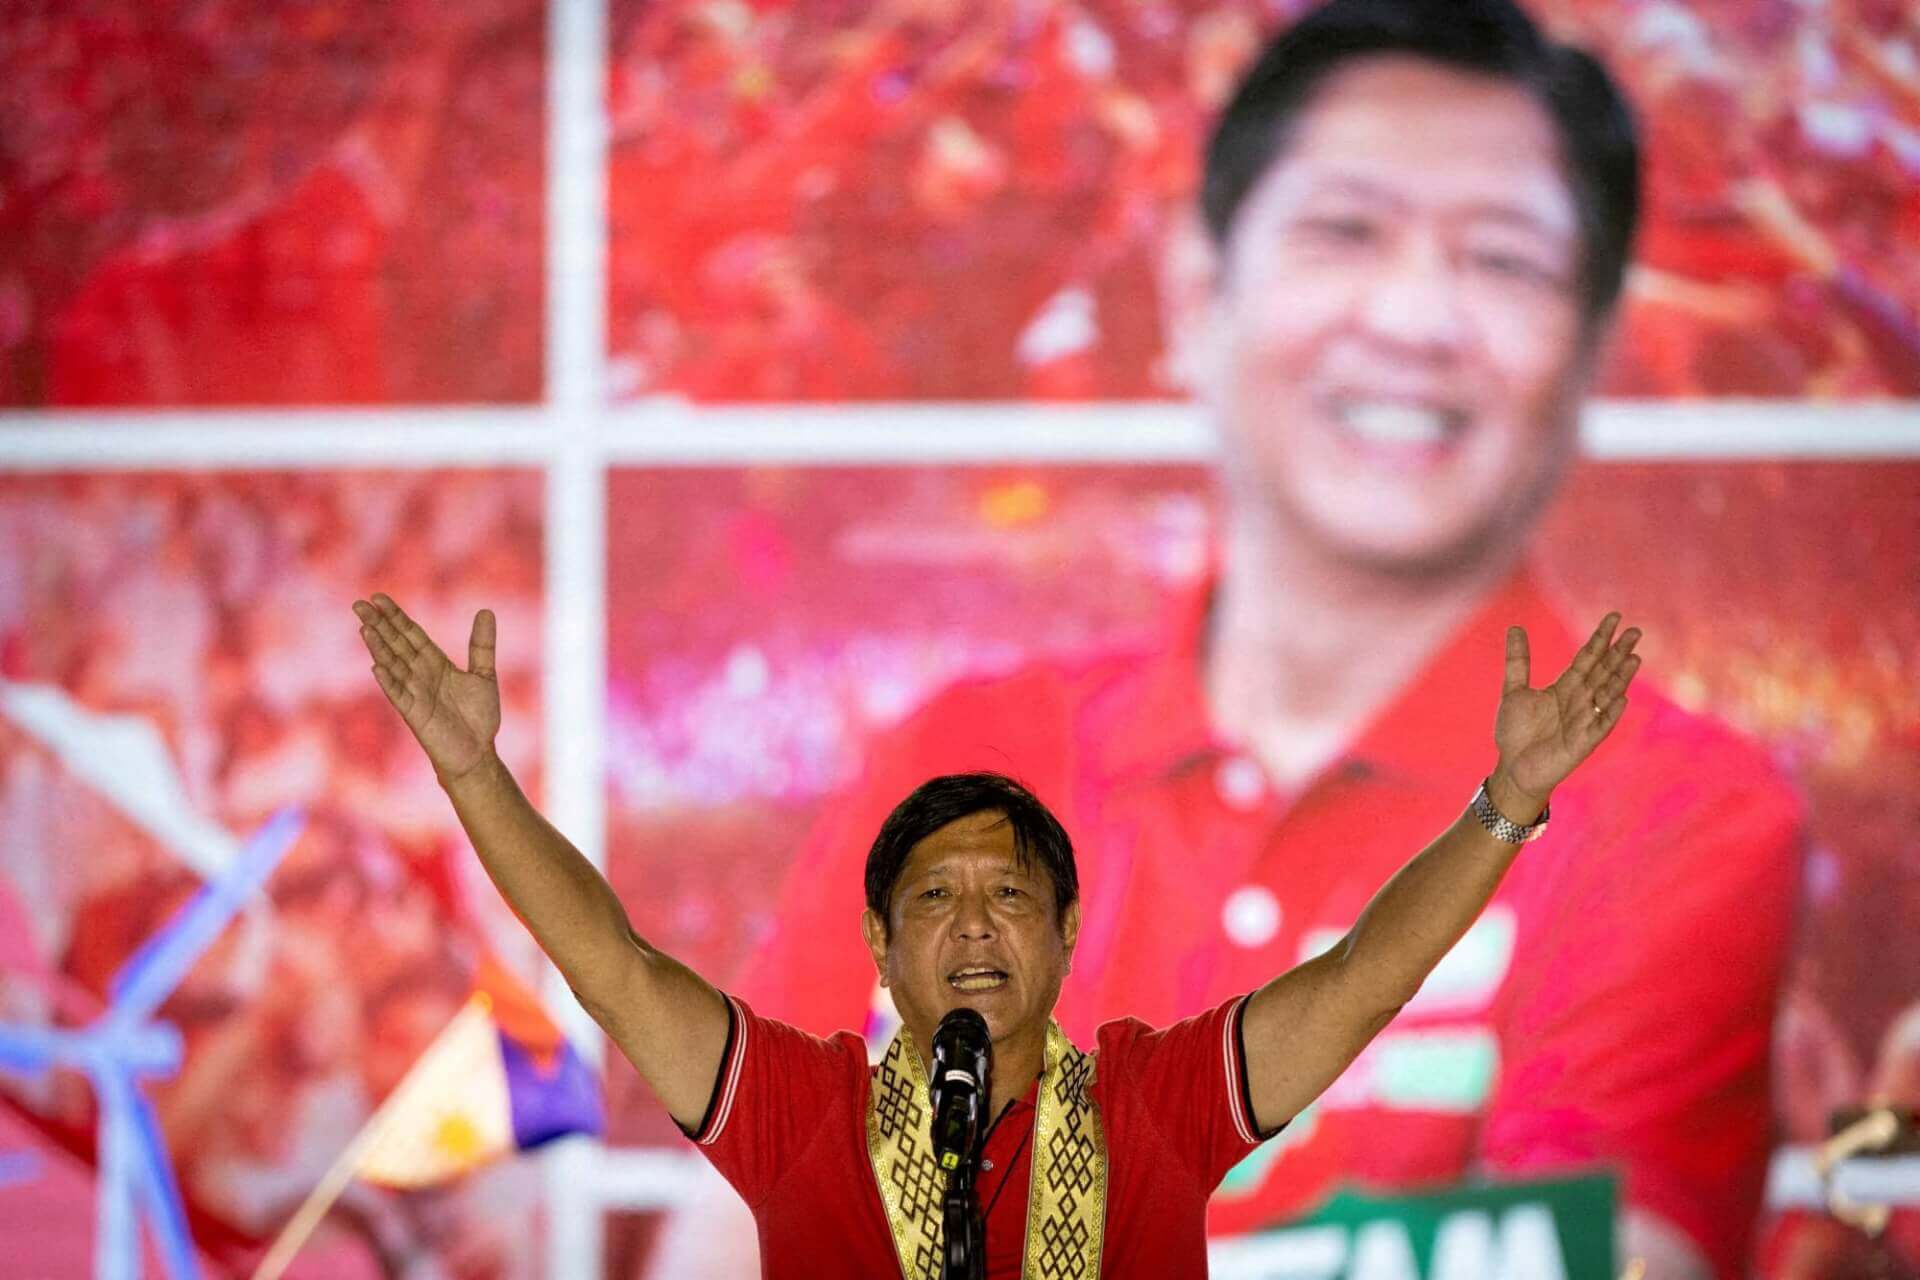 Marcos Jr. On the Verge of Becoming Philippines’ New President via Landslide Victory